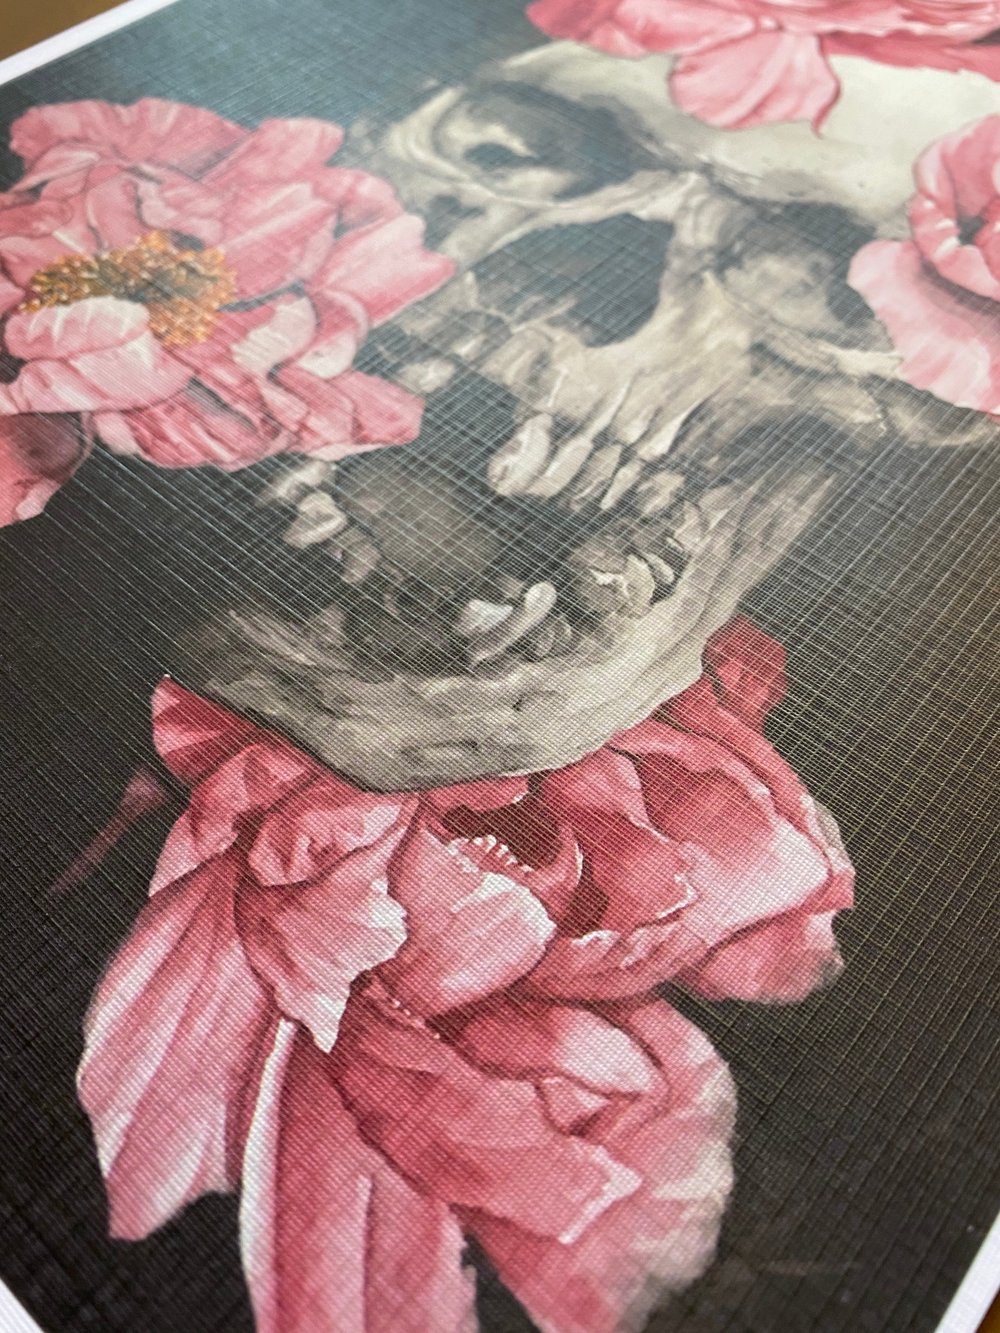 Skull with Flowers Print (DIN A3)